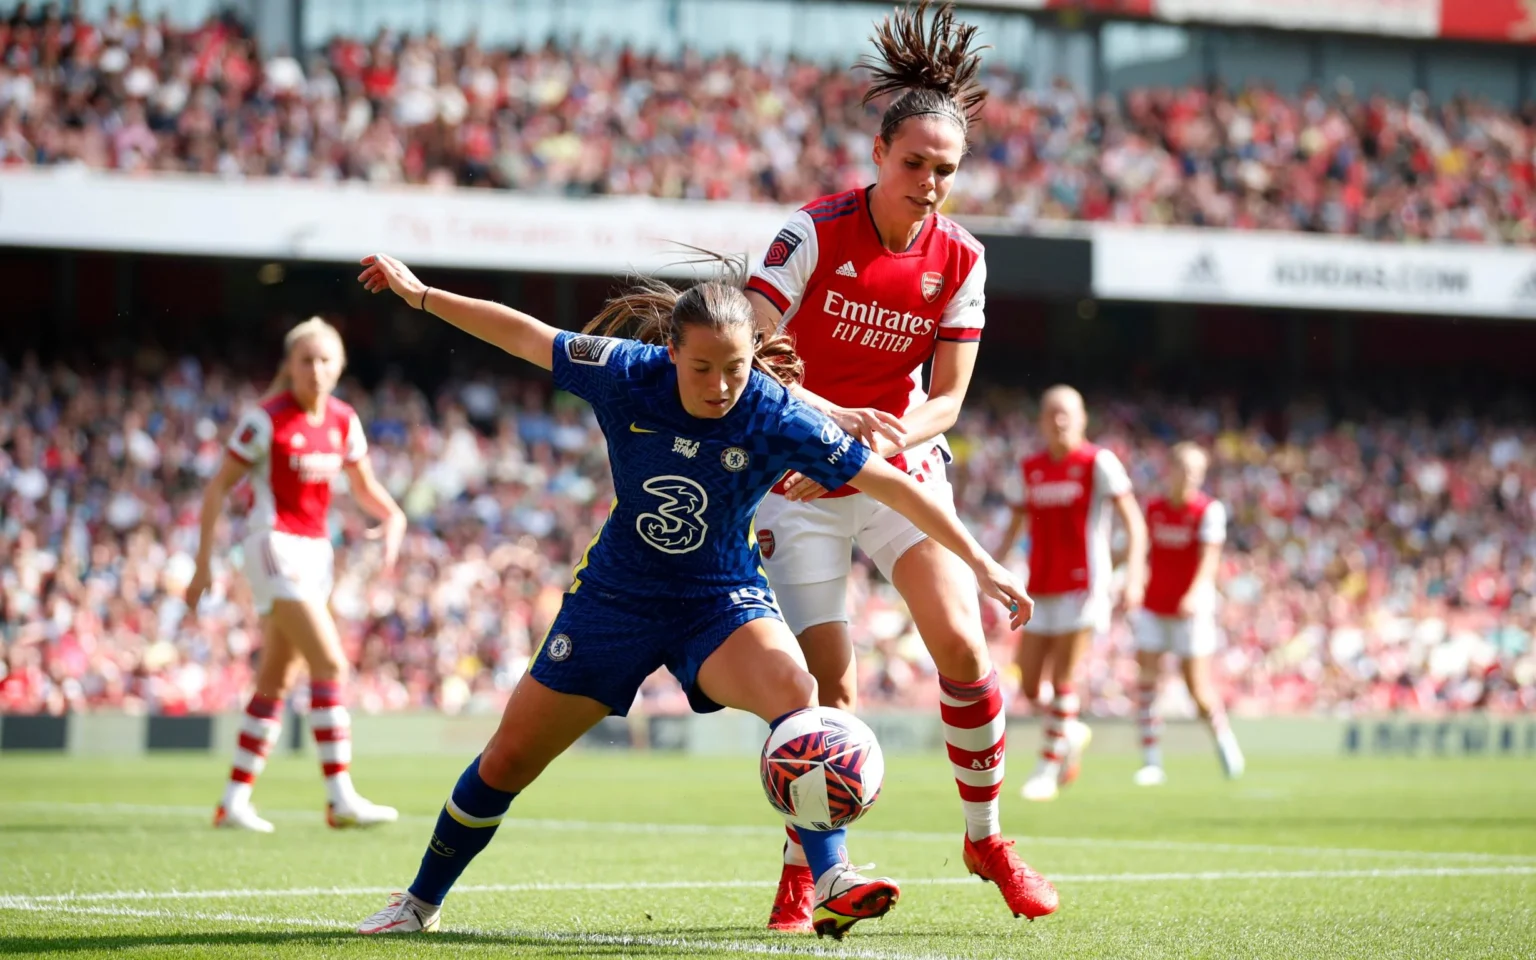 WSL: Super League fixtures this weekend - Arsenal face Chelsea at the Emirates in front of 55,000